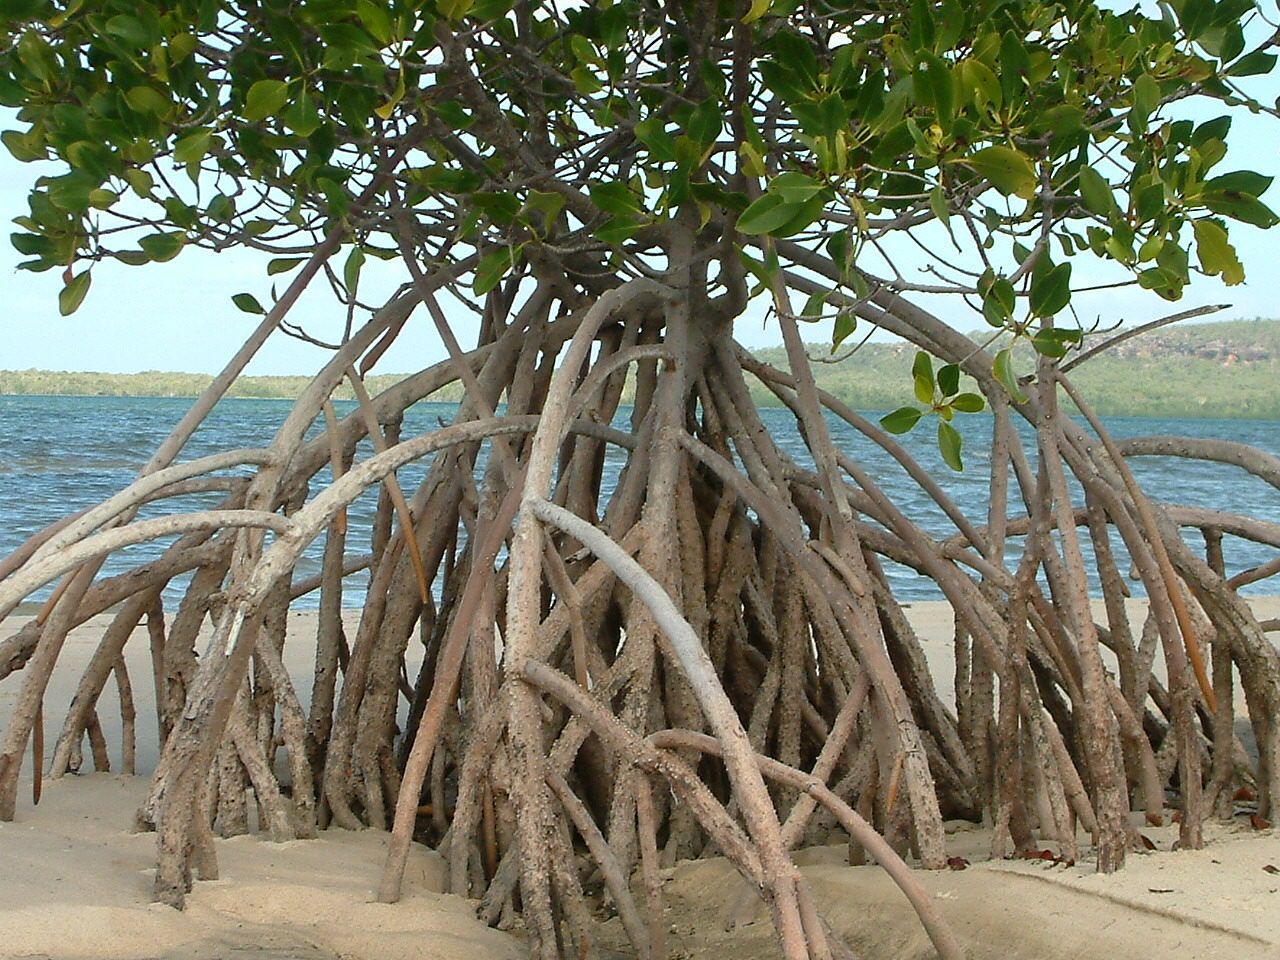 Mangrove trees can grow in sand.